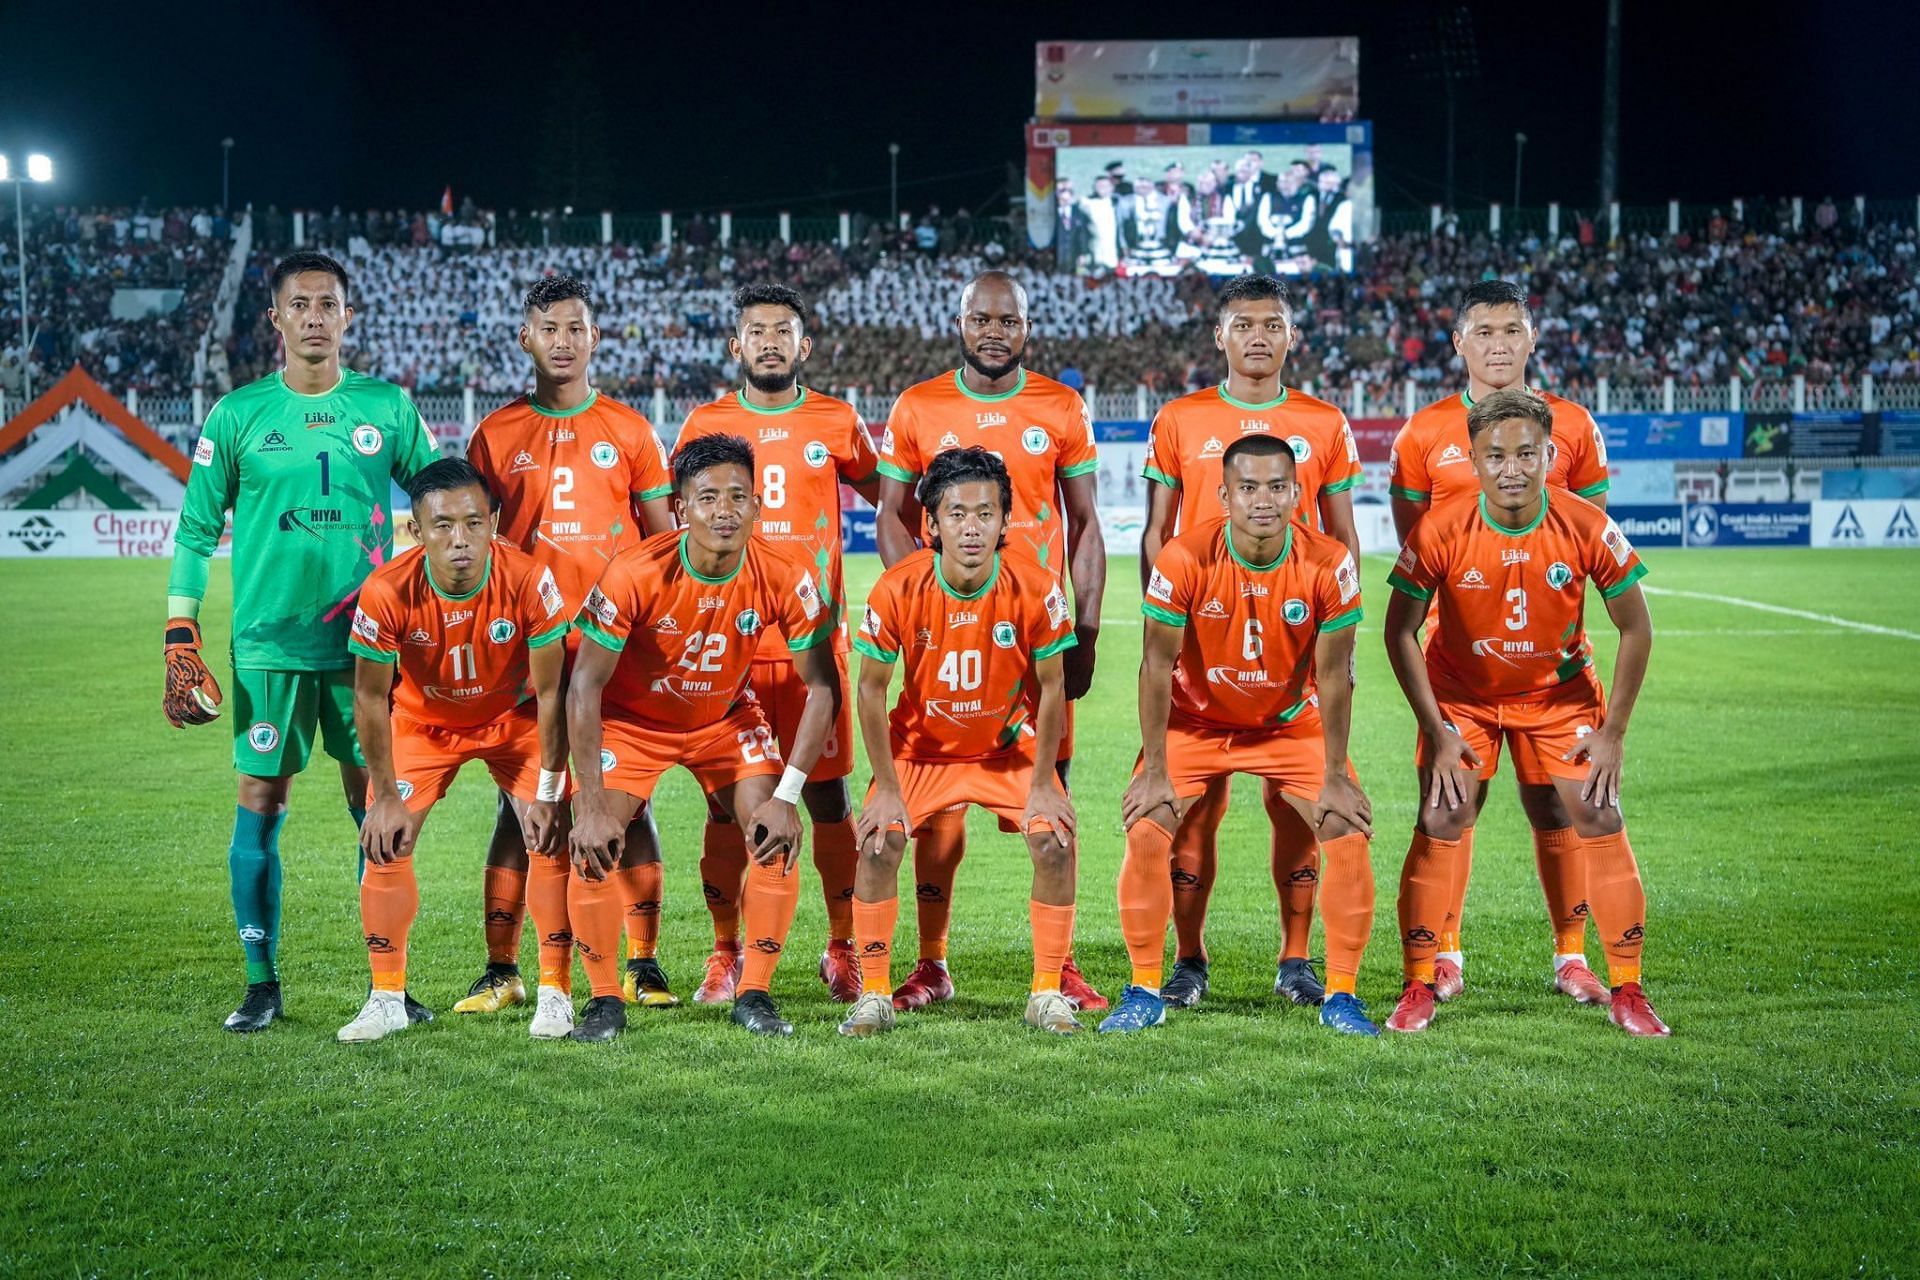 NEROCA FC got off to a winning start in the 2022 Durand Cup with a 3-1 win over TRAU FC in the Imphal Derby on Thursday. (Image - Twitter @NerocaFC)